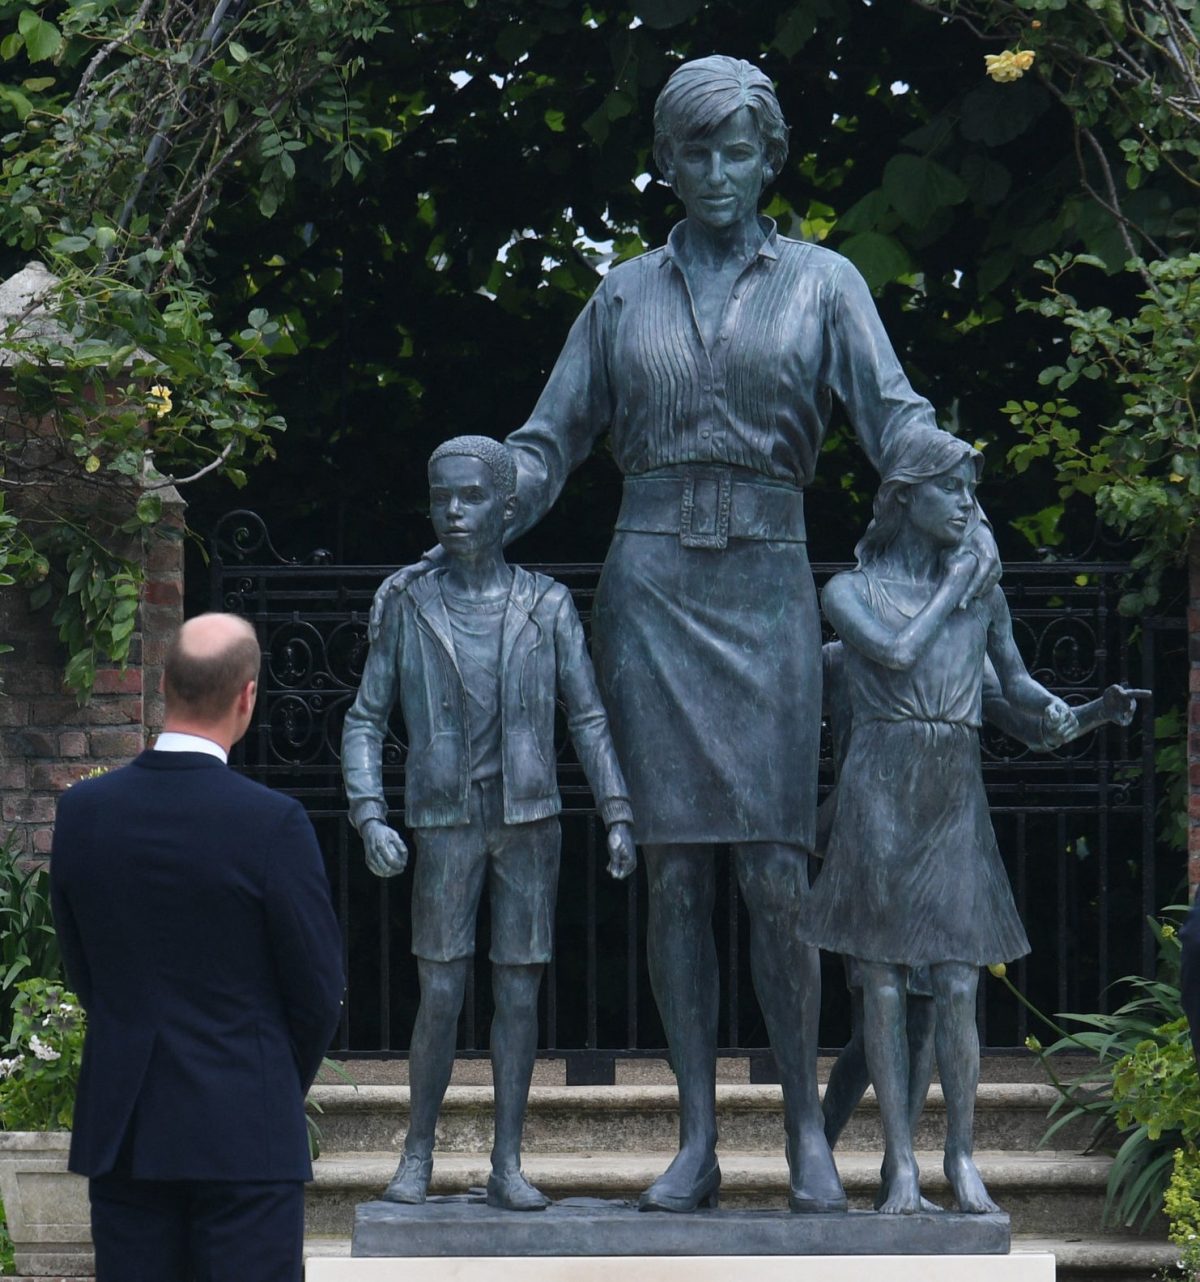 Prince William standing in front of a statue of his mother, Princess Diana, at The Sunken Garden in Kensington Palace